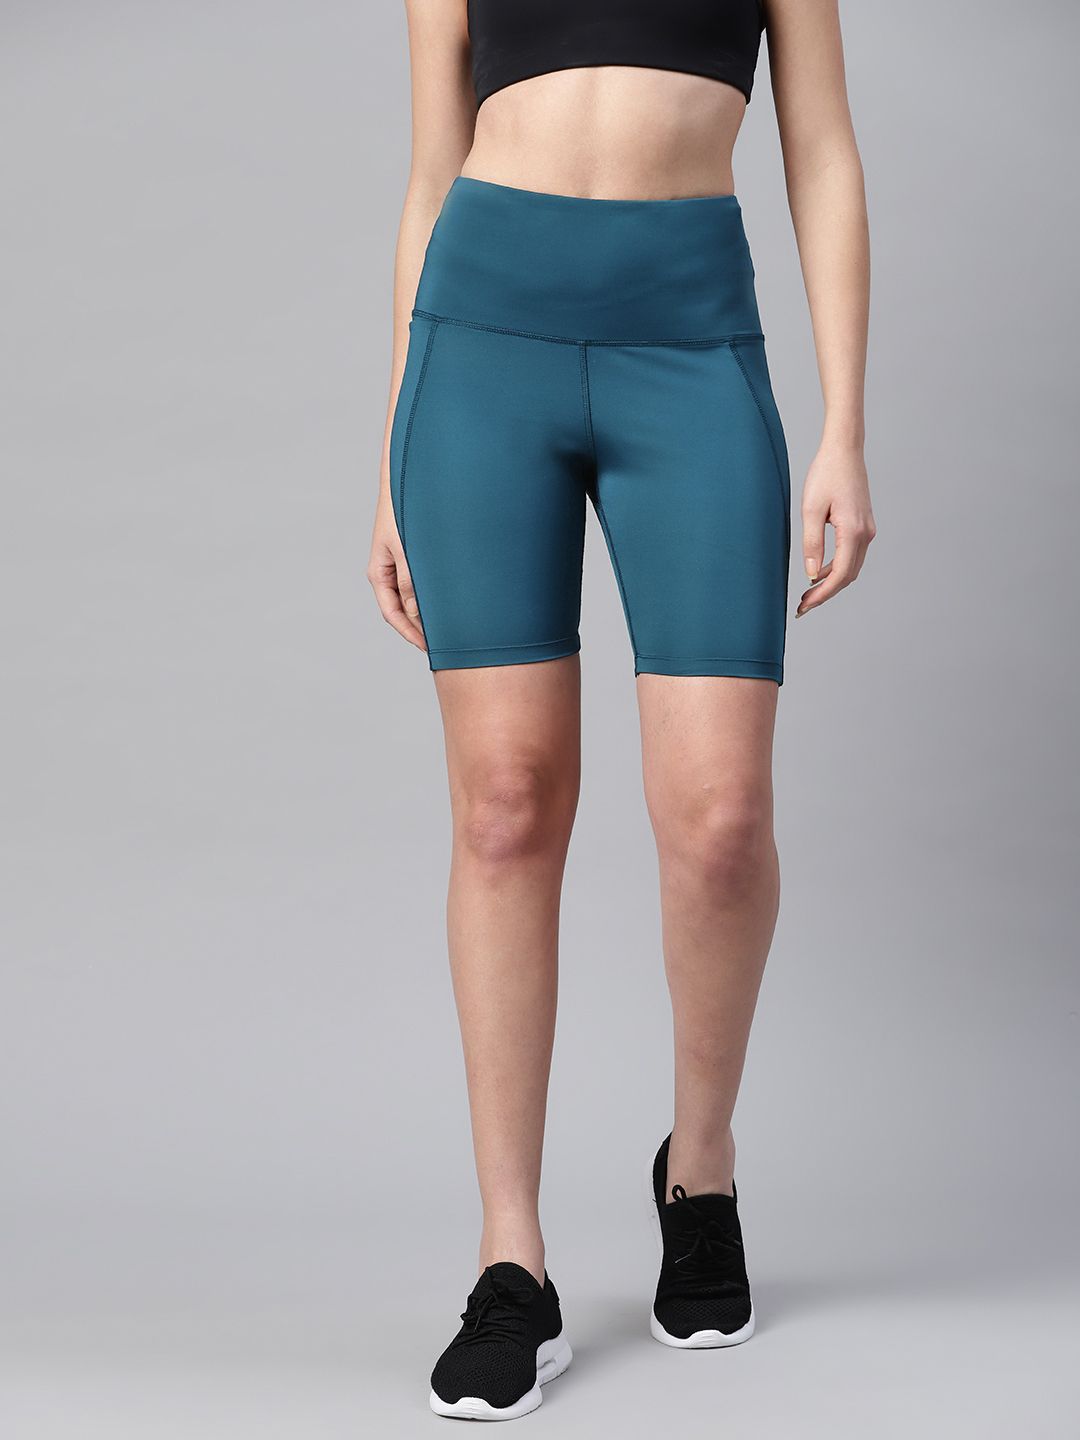 PICOT Women Teal Blue Skinny Fit High-Rise Cycling Sports Shorts Price in India